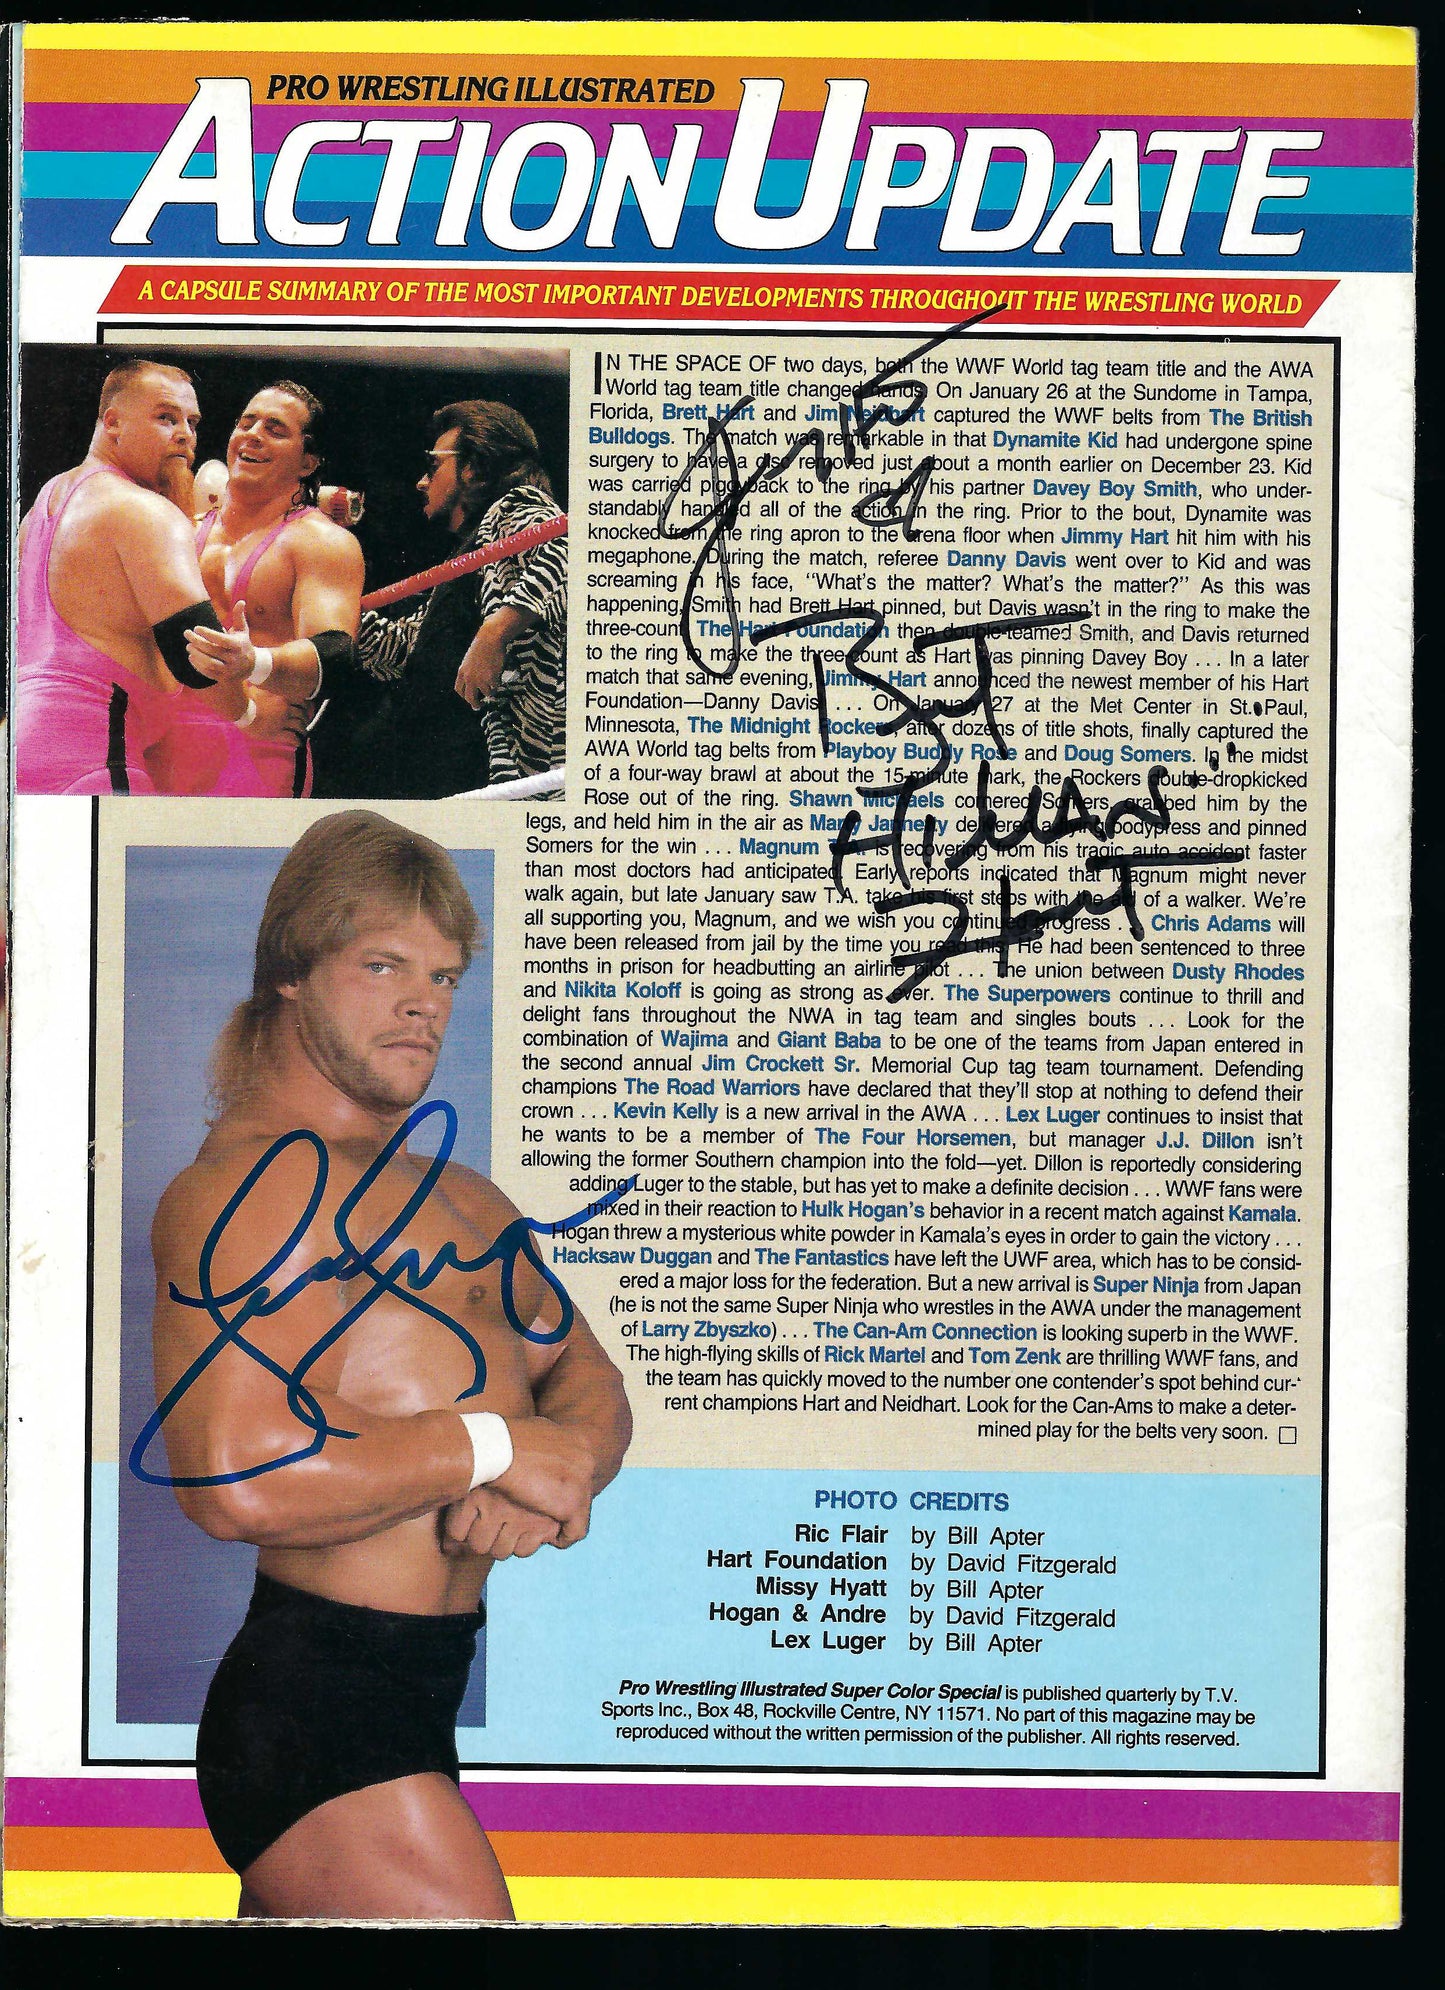 MHM1 Missy Hyatt Autographed HISTORIC Super Color Special  VERY SEXY Poster Special #9 w/COA Bret Hart Lex Luger Jimmy Hart Ric Flair